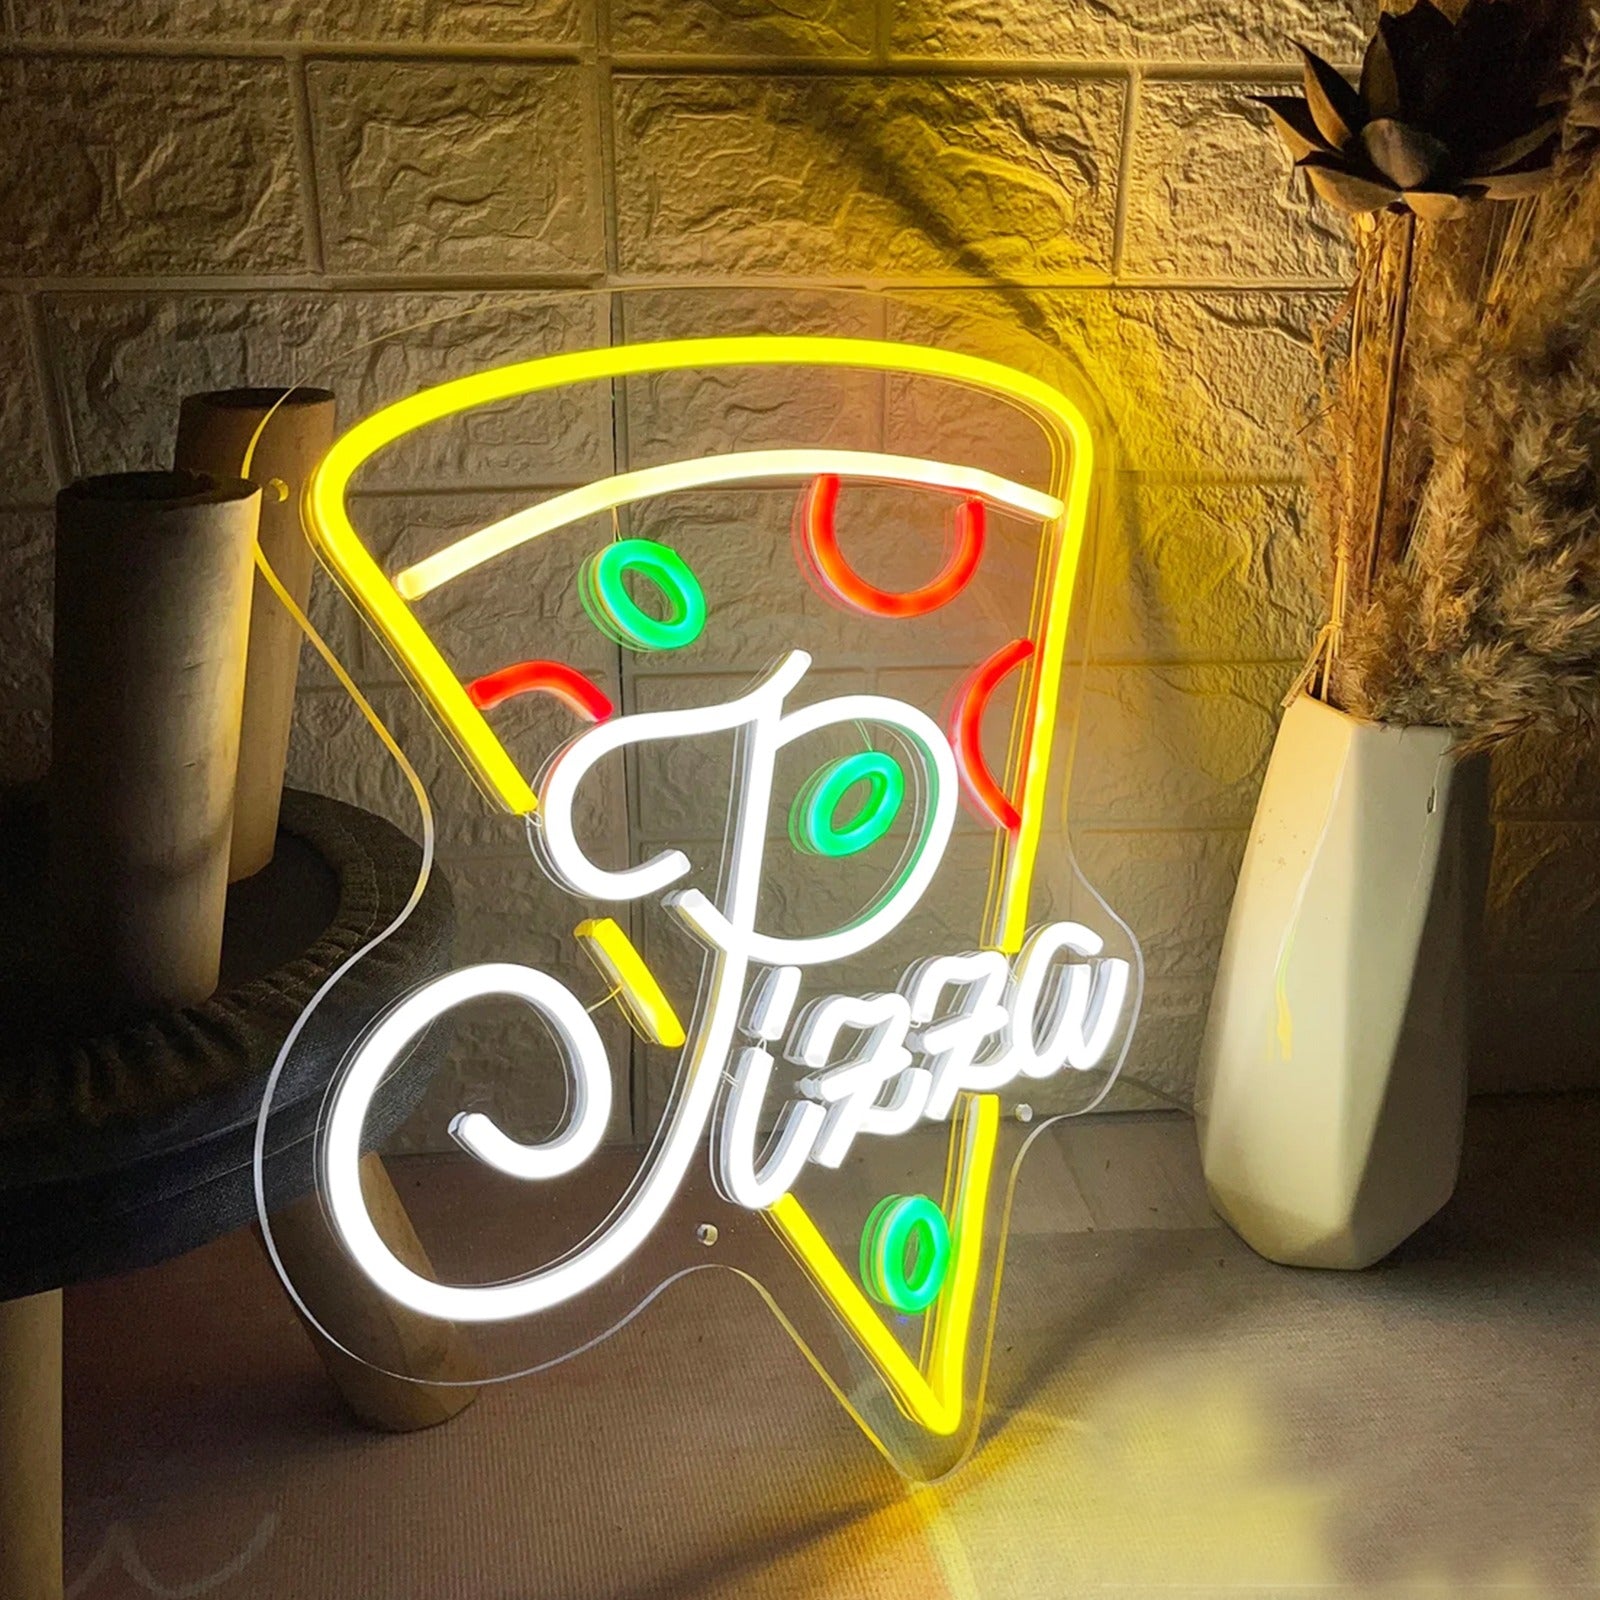  Pizza neon sign - a popular trend